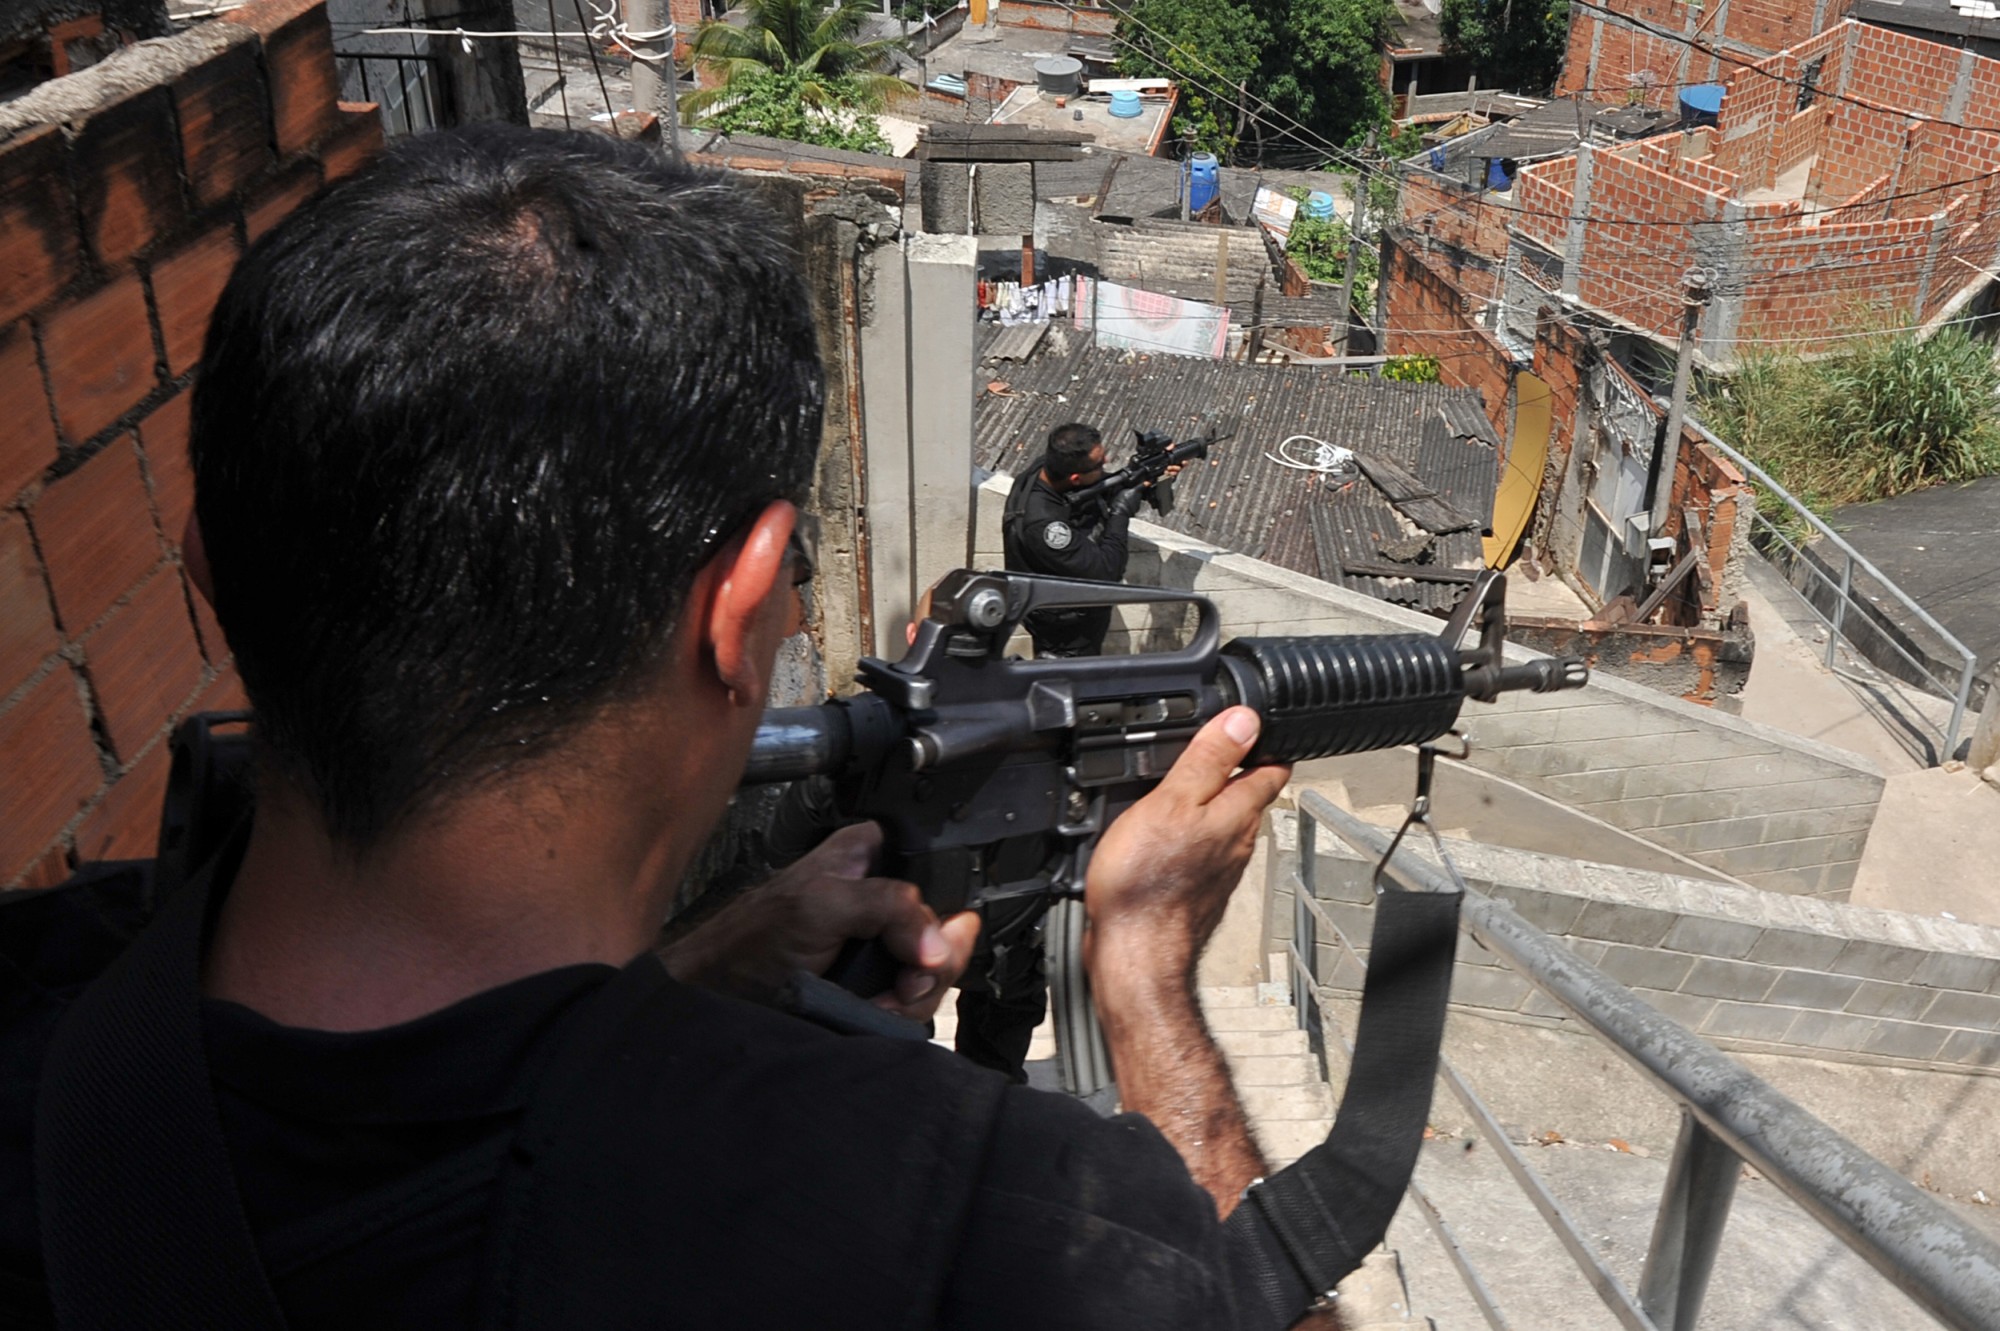 Survey Shows Increase in Violent Deaths in Brazil in 2014